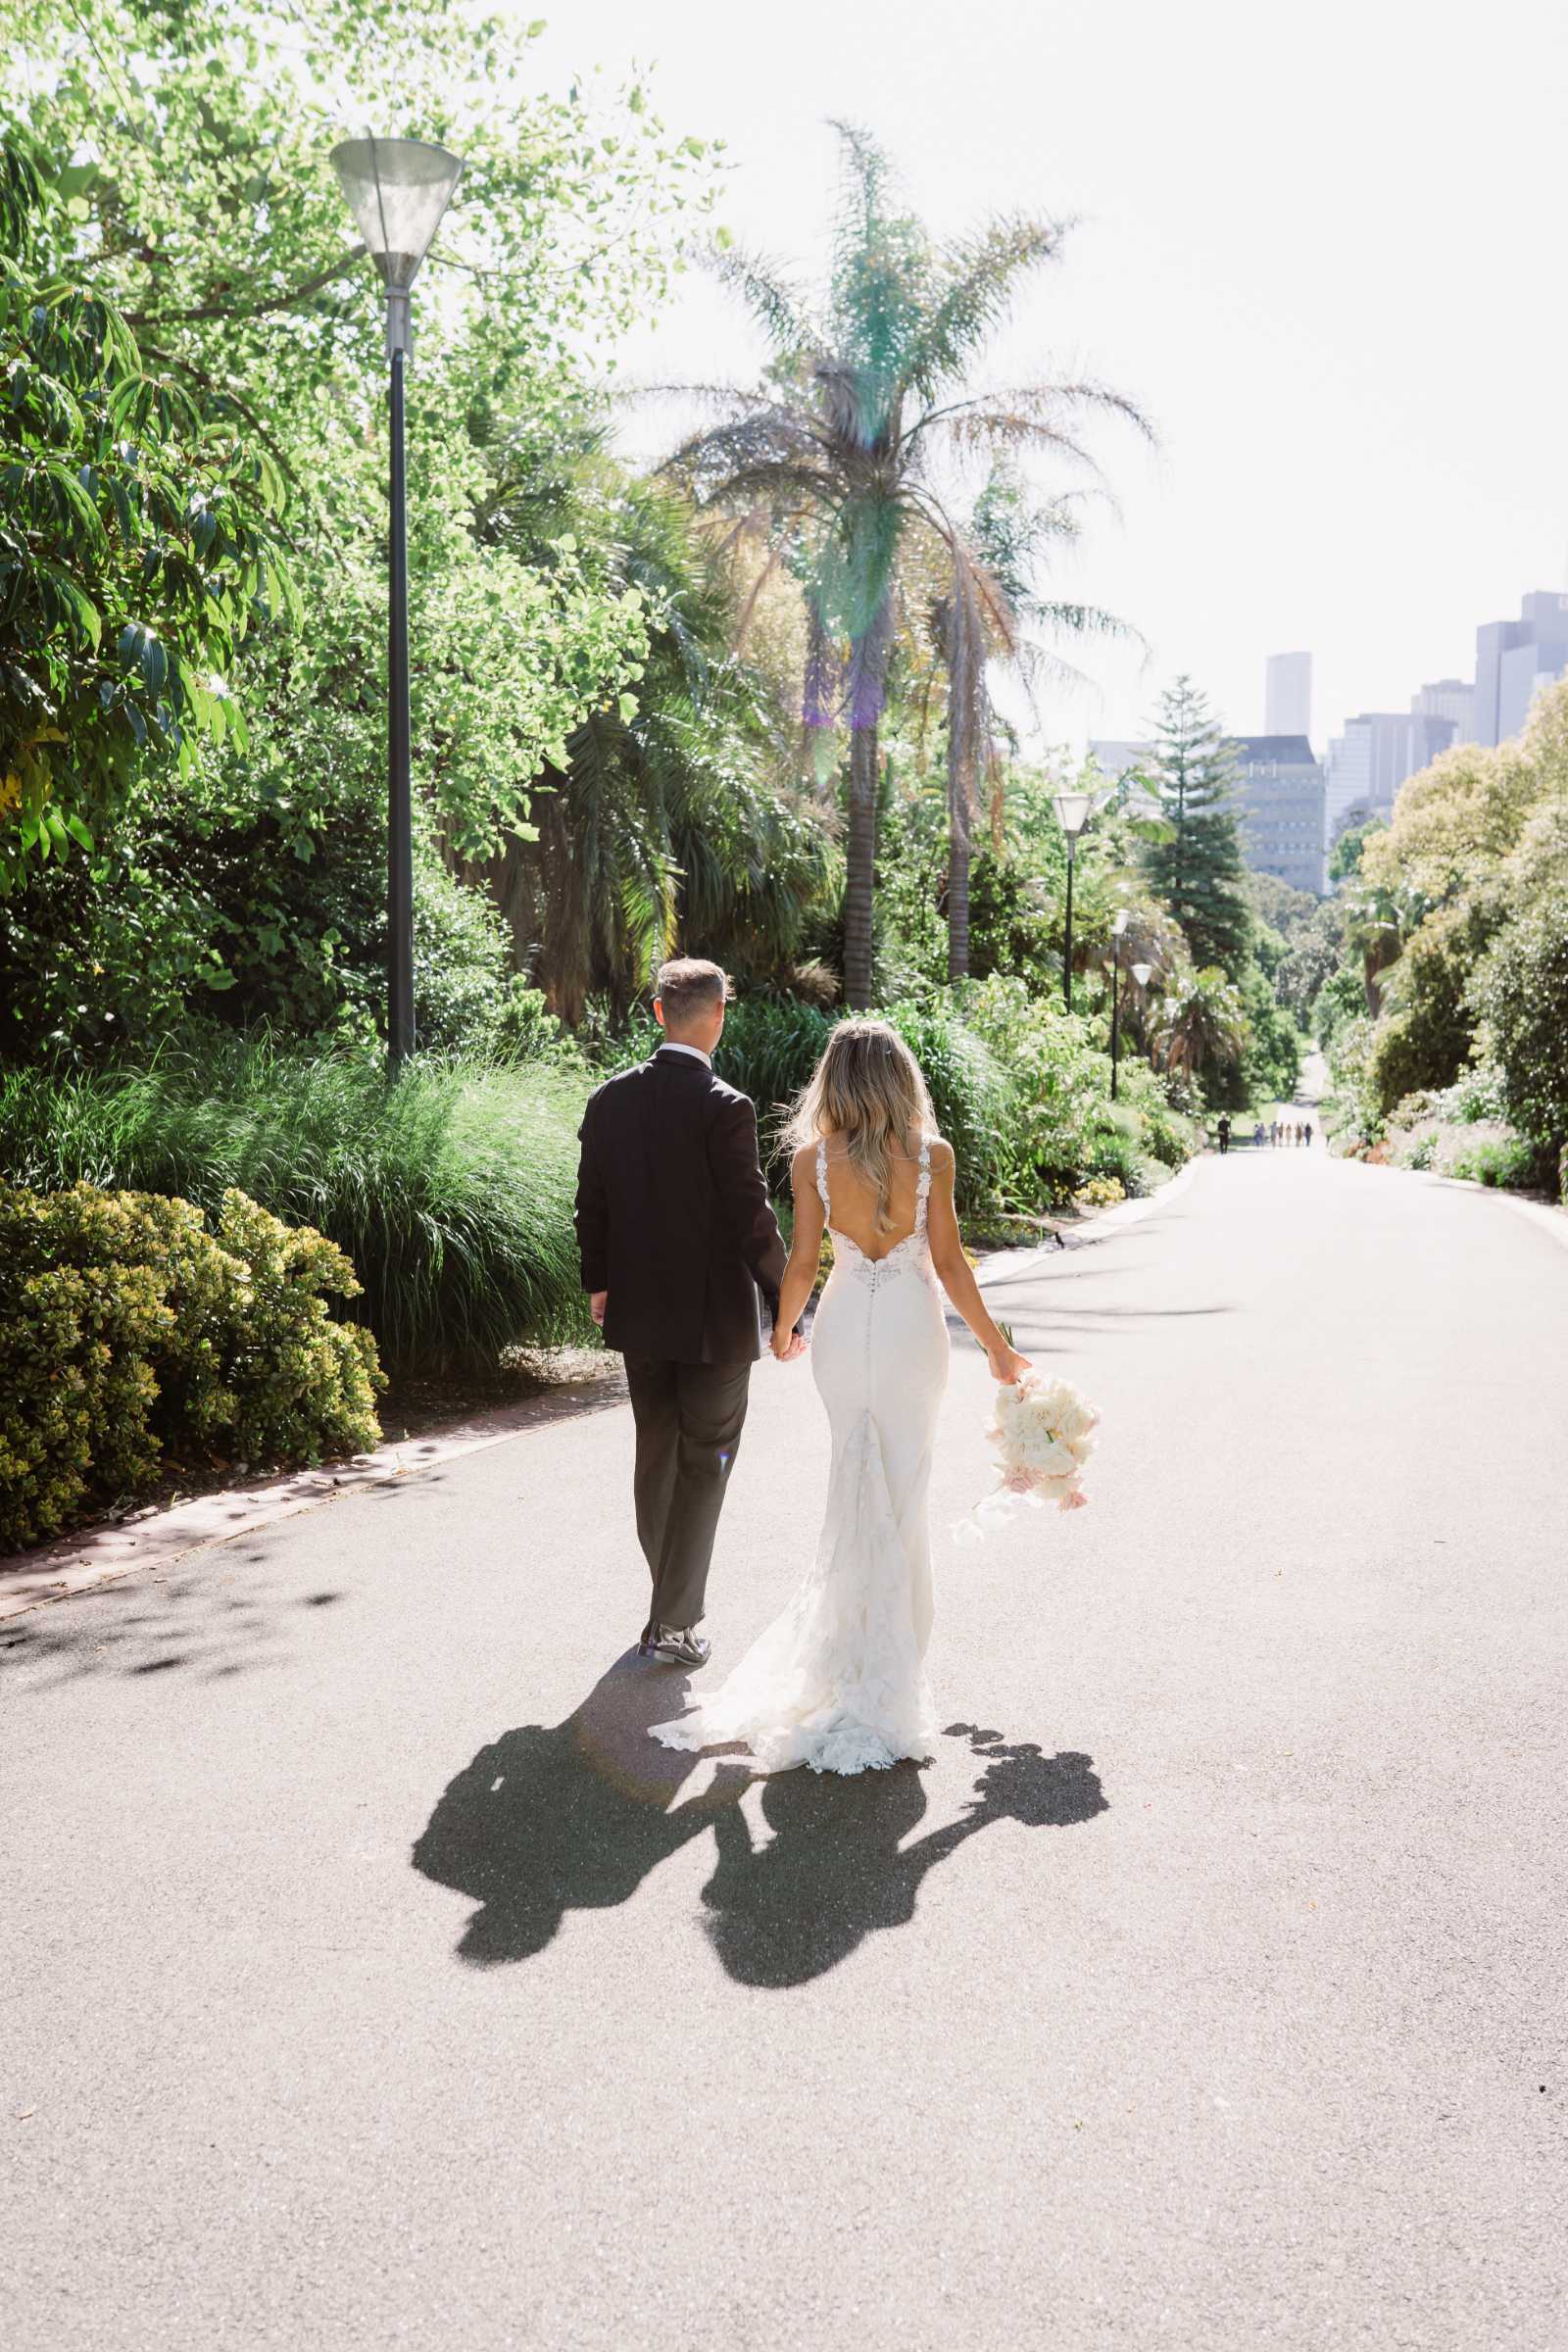 Modern and romantic for Elyse and Drazen's San Remo Ballroom wedding in Melbourne. Photographed by Theodore & Co.